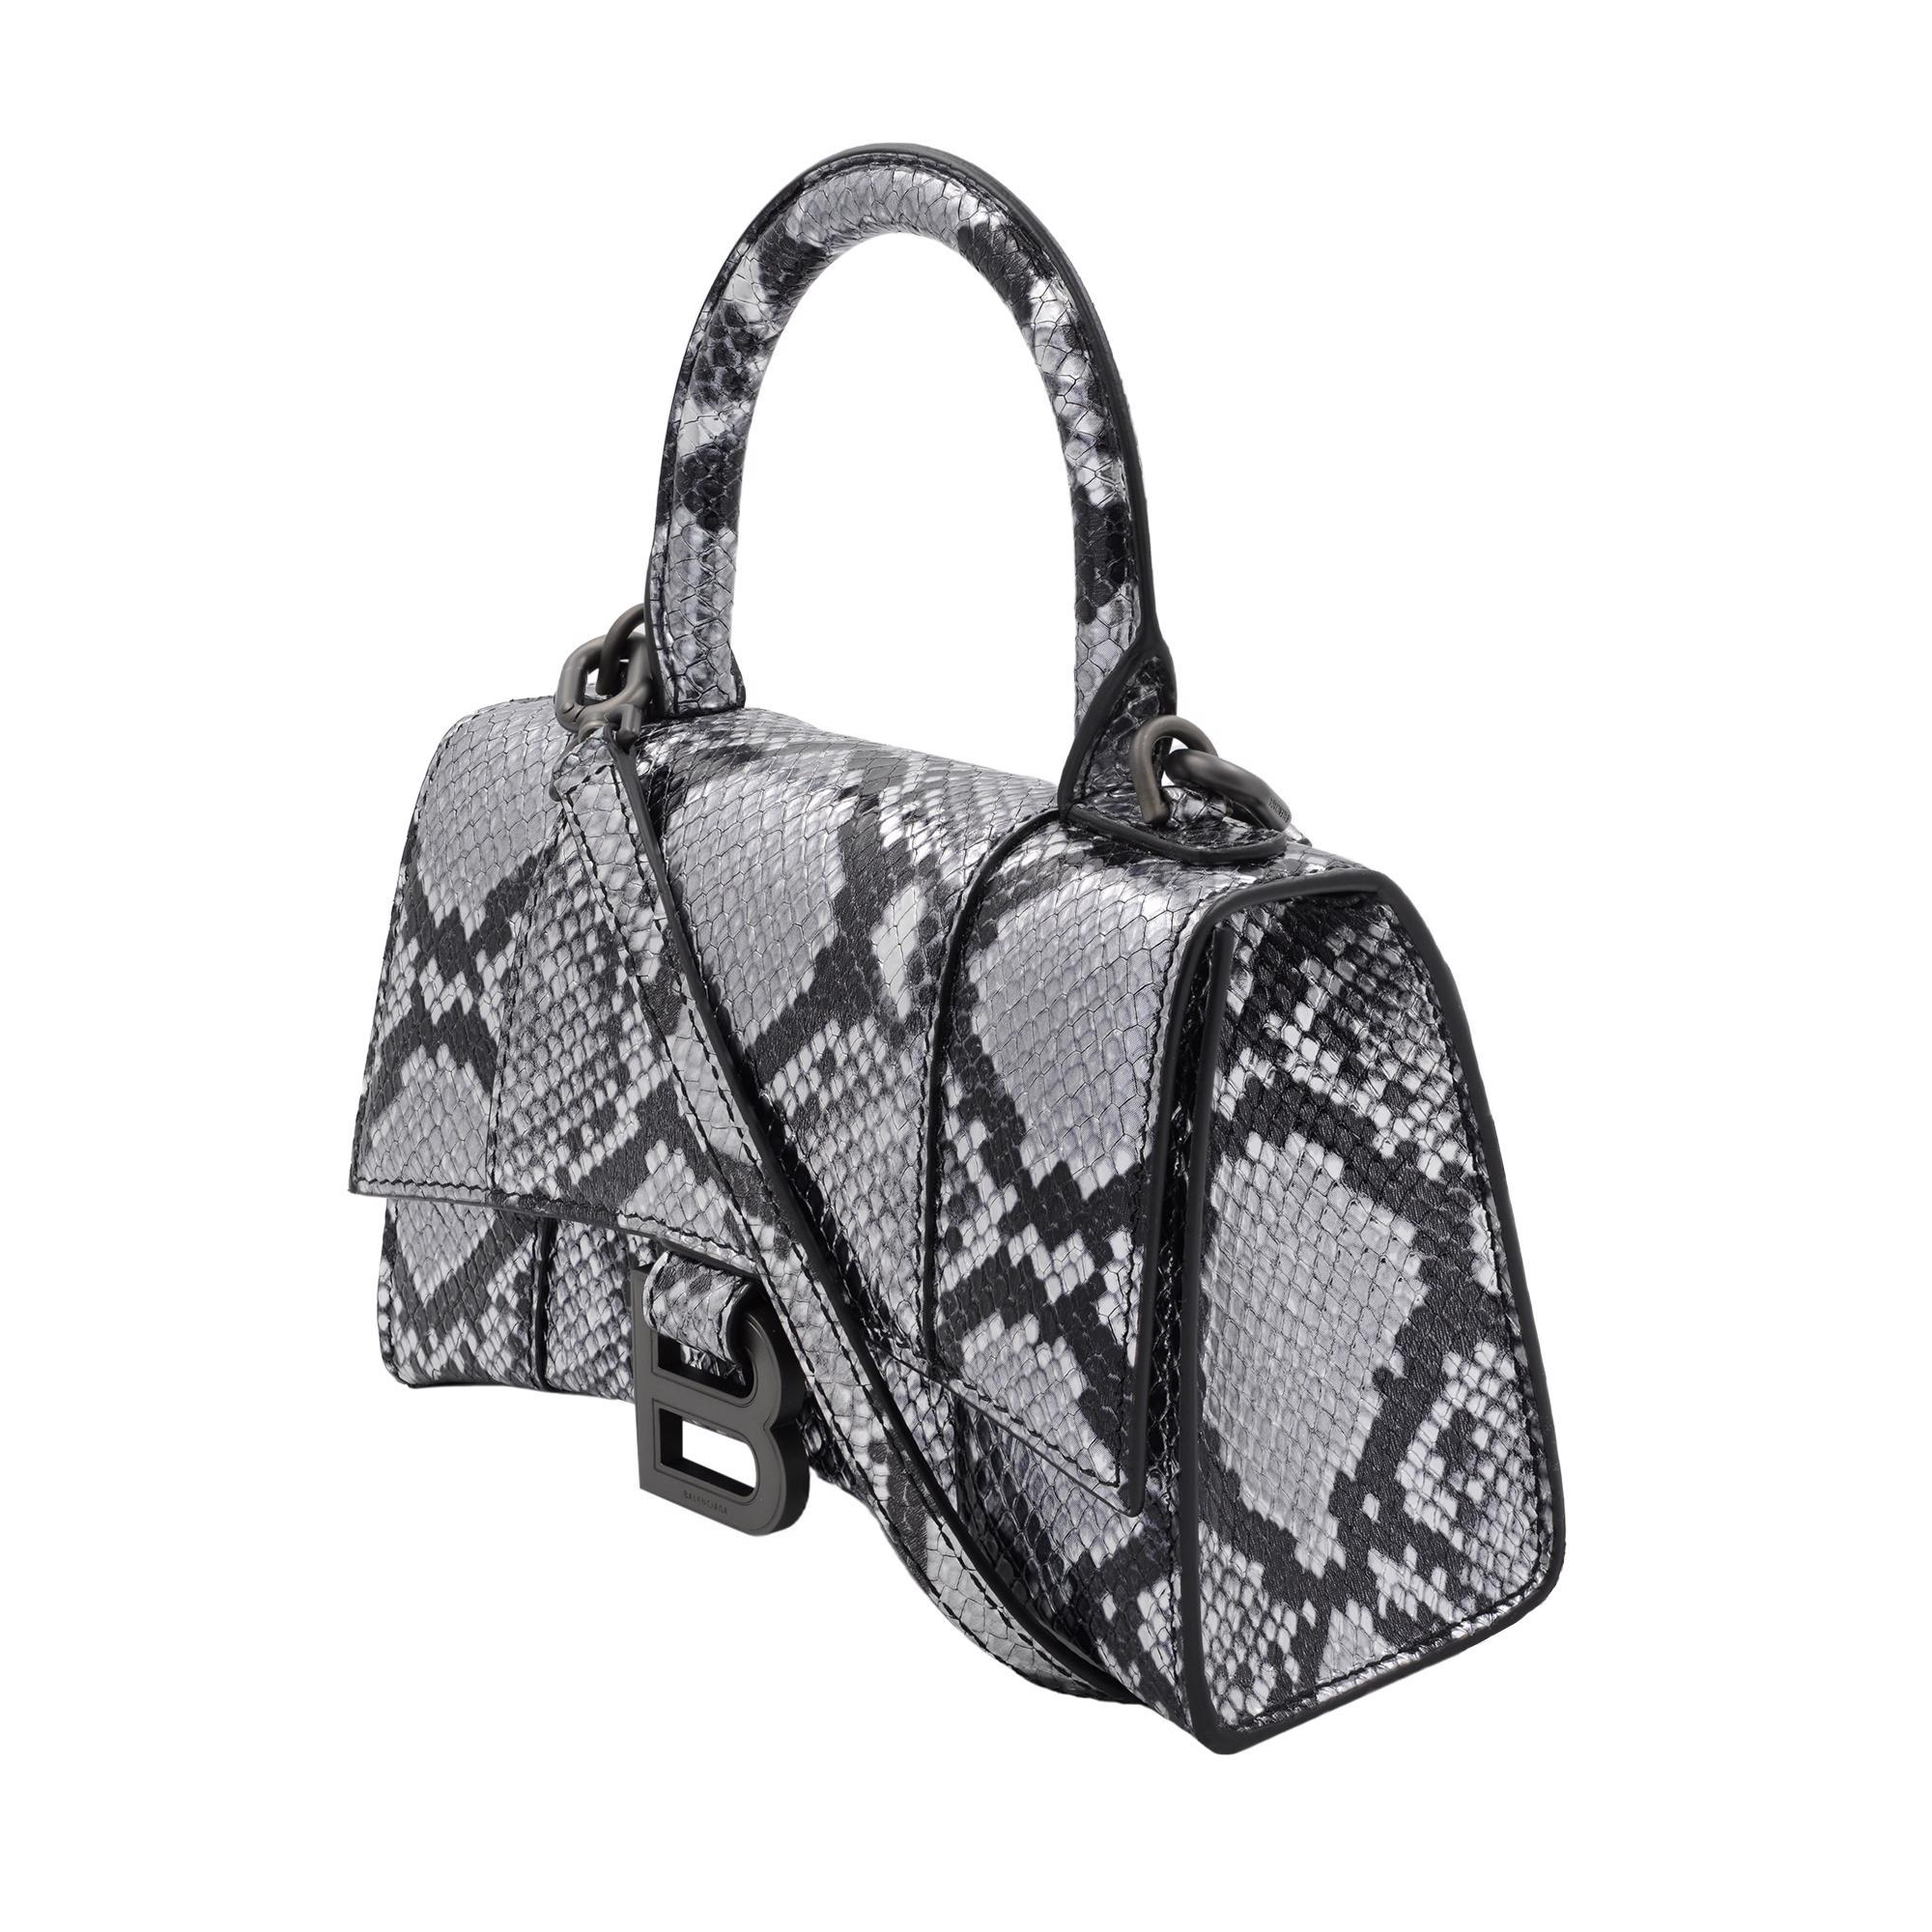 Balenciaga Hourglass XS metallic python embossed Leather women's to handle bag. Includes adjustable strap, 8.5-23 inches. Can be worn as a shoulder or handbag. Dimensions : H 4.5 inches x W 7.5 inches x D 3 inches. Made in Italy. Unworn condition.